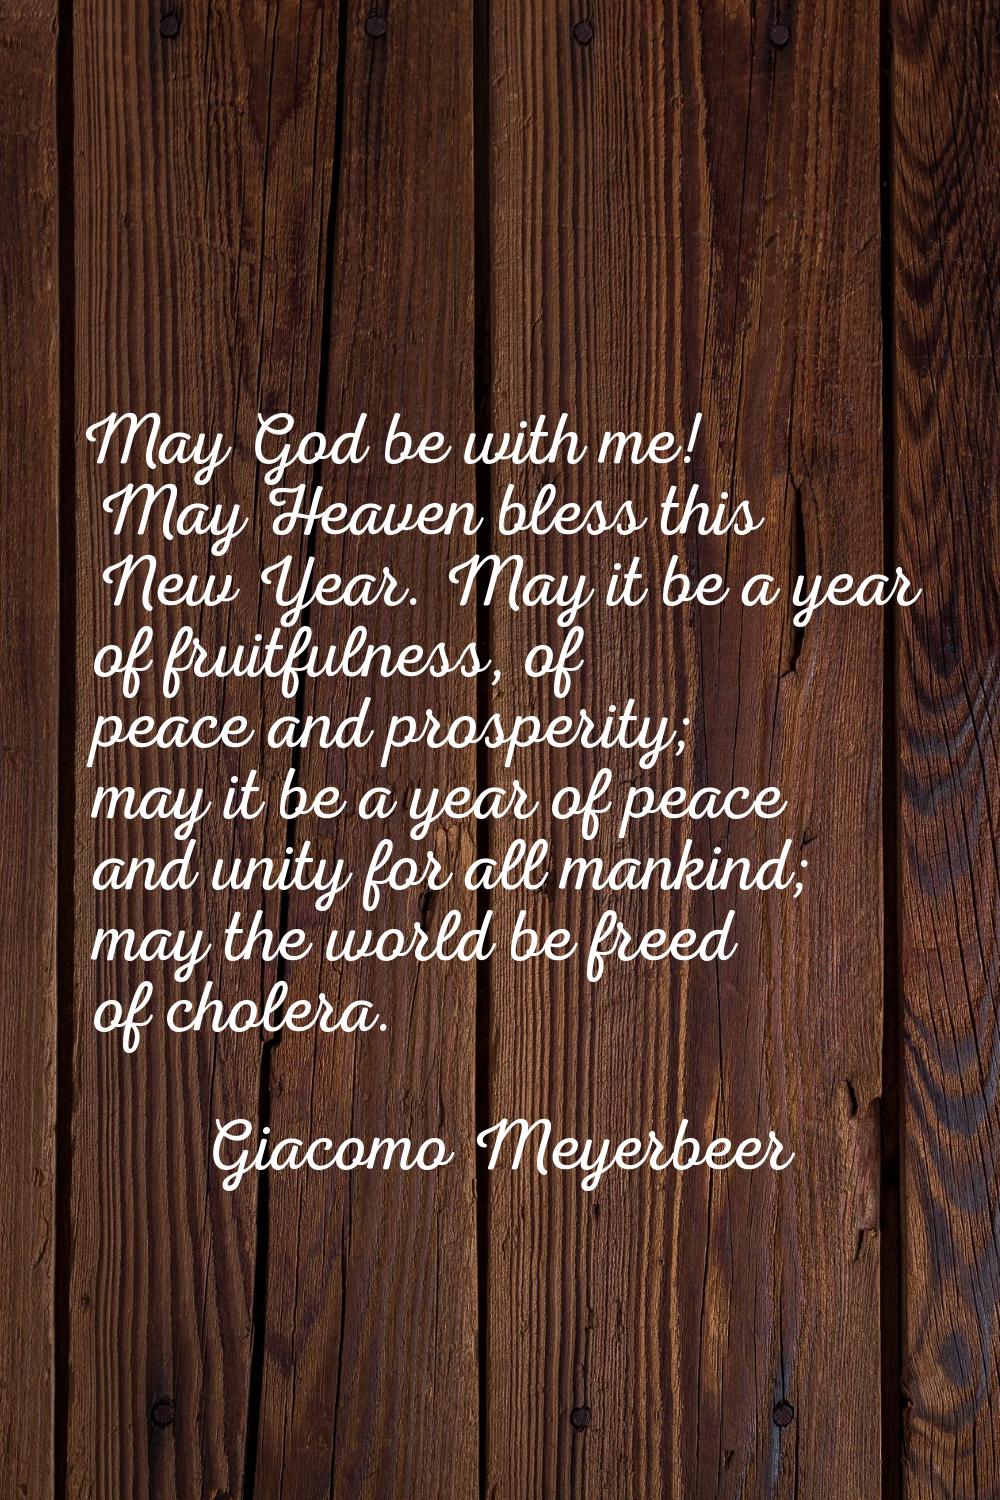 May God be with me! May Heaven bless this New Year. May it be a year of fruitfulness, of peace and 